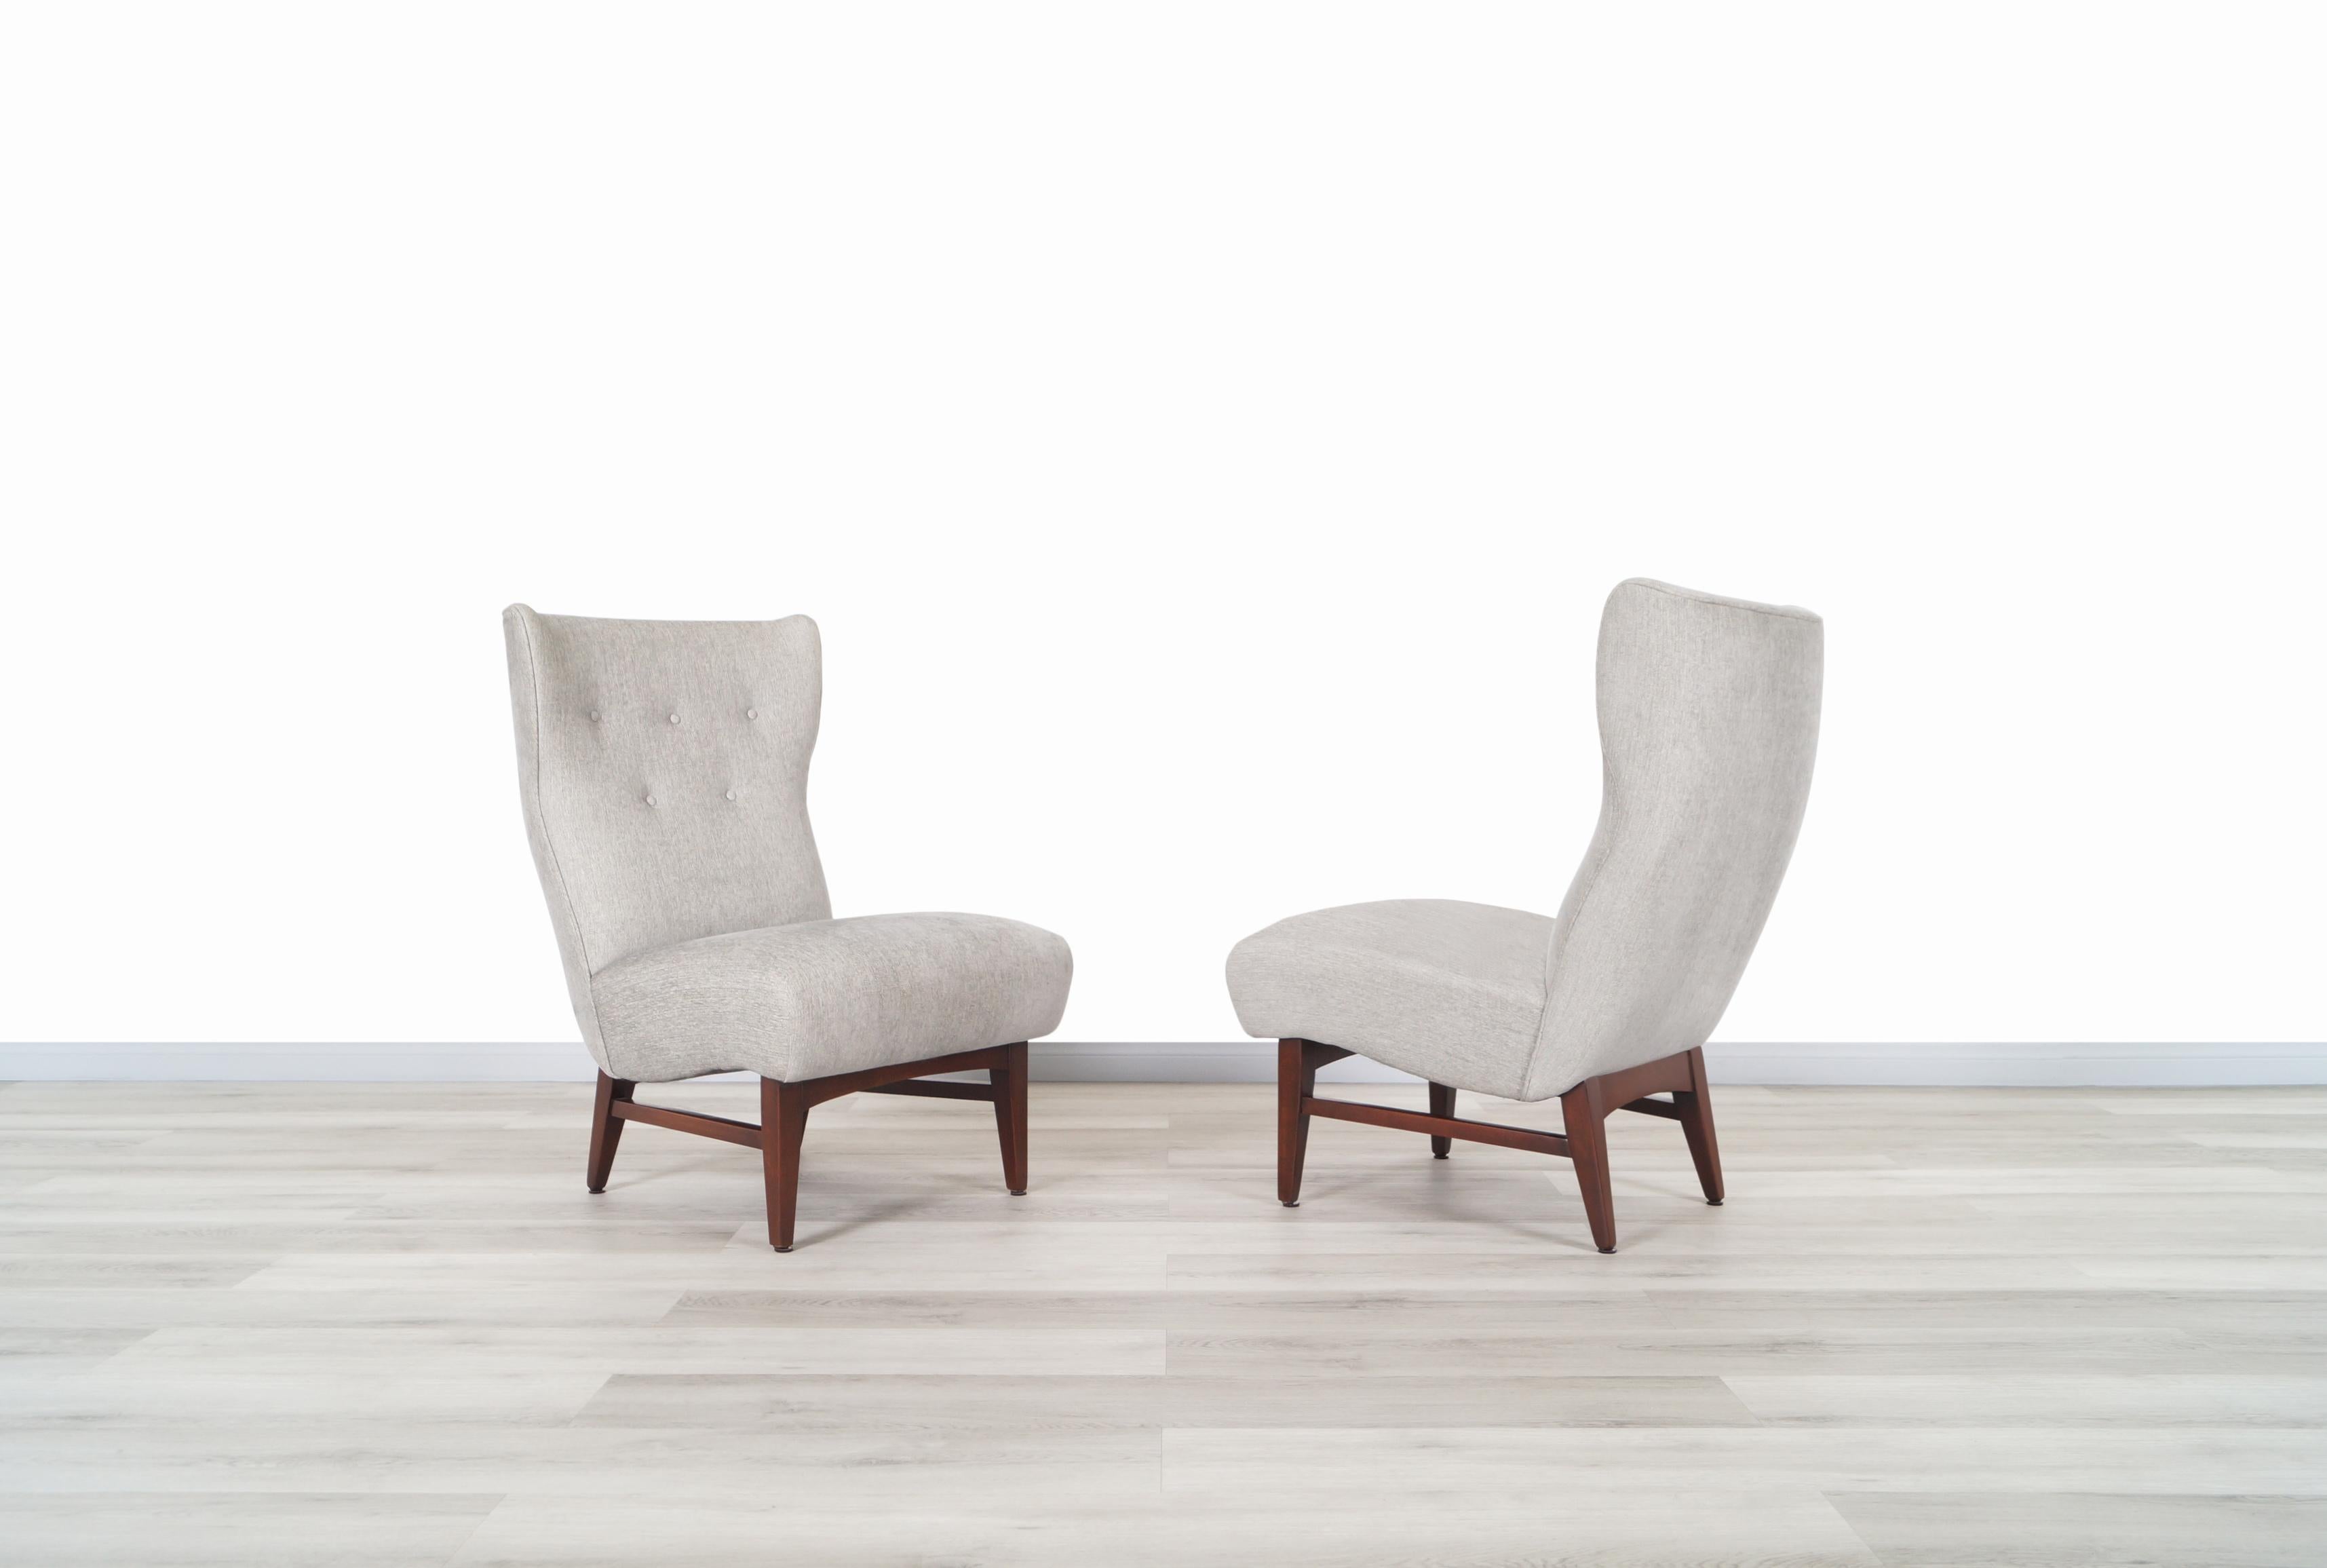 A beautiful pair of vintage wingback slipper lounge chairs manufactured in the United States, circa 1950s. These elegant chairs feature a sturdy solid walnut base and, newly upholstered seat in a shade of gray fabric with tufted details on the